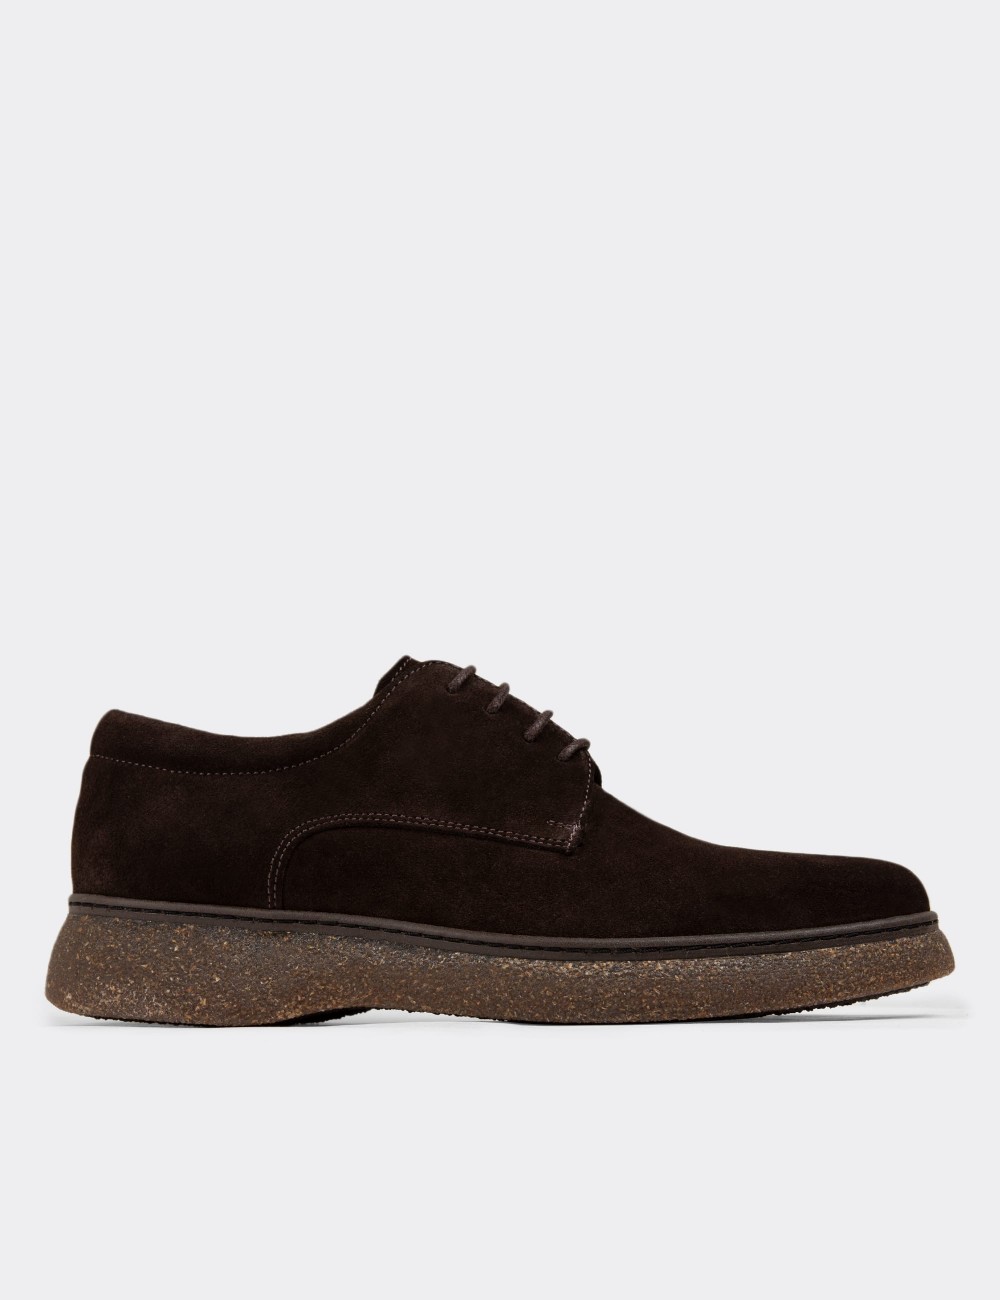 Brown Suede Leather Lace-up Shoes - 01934MKHVC04